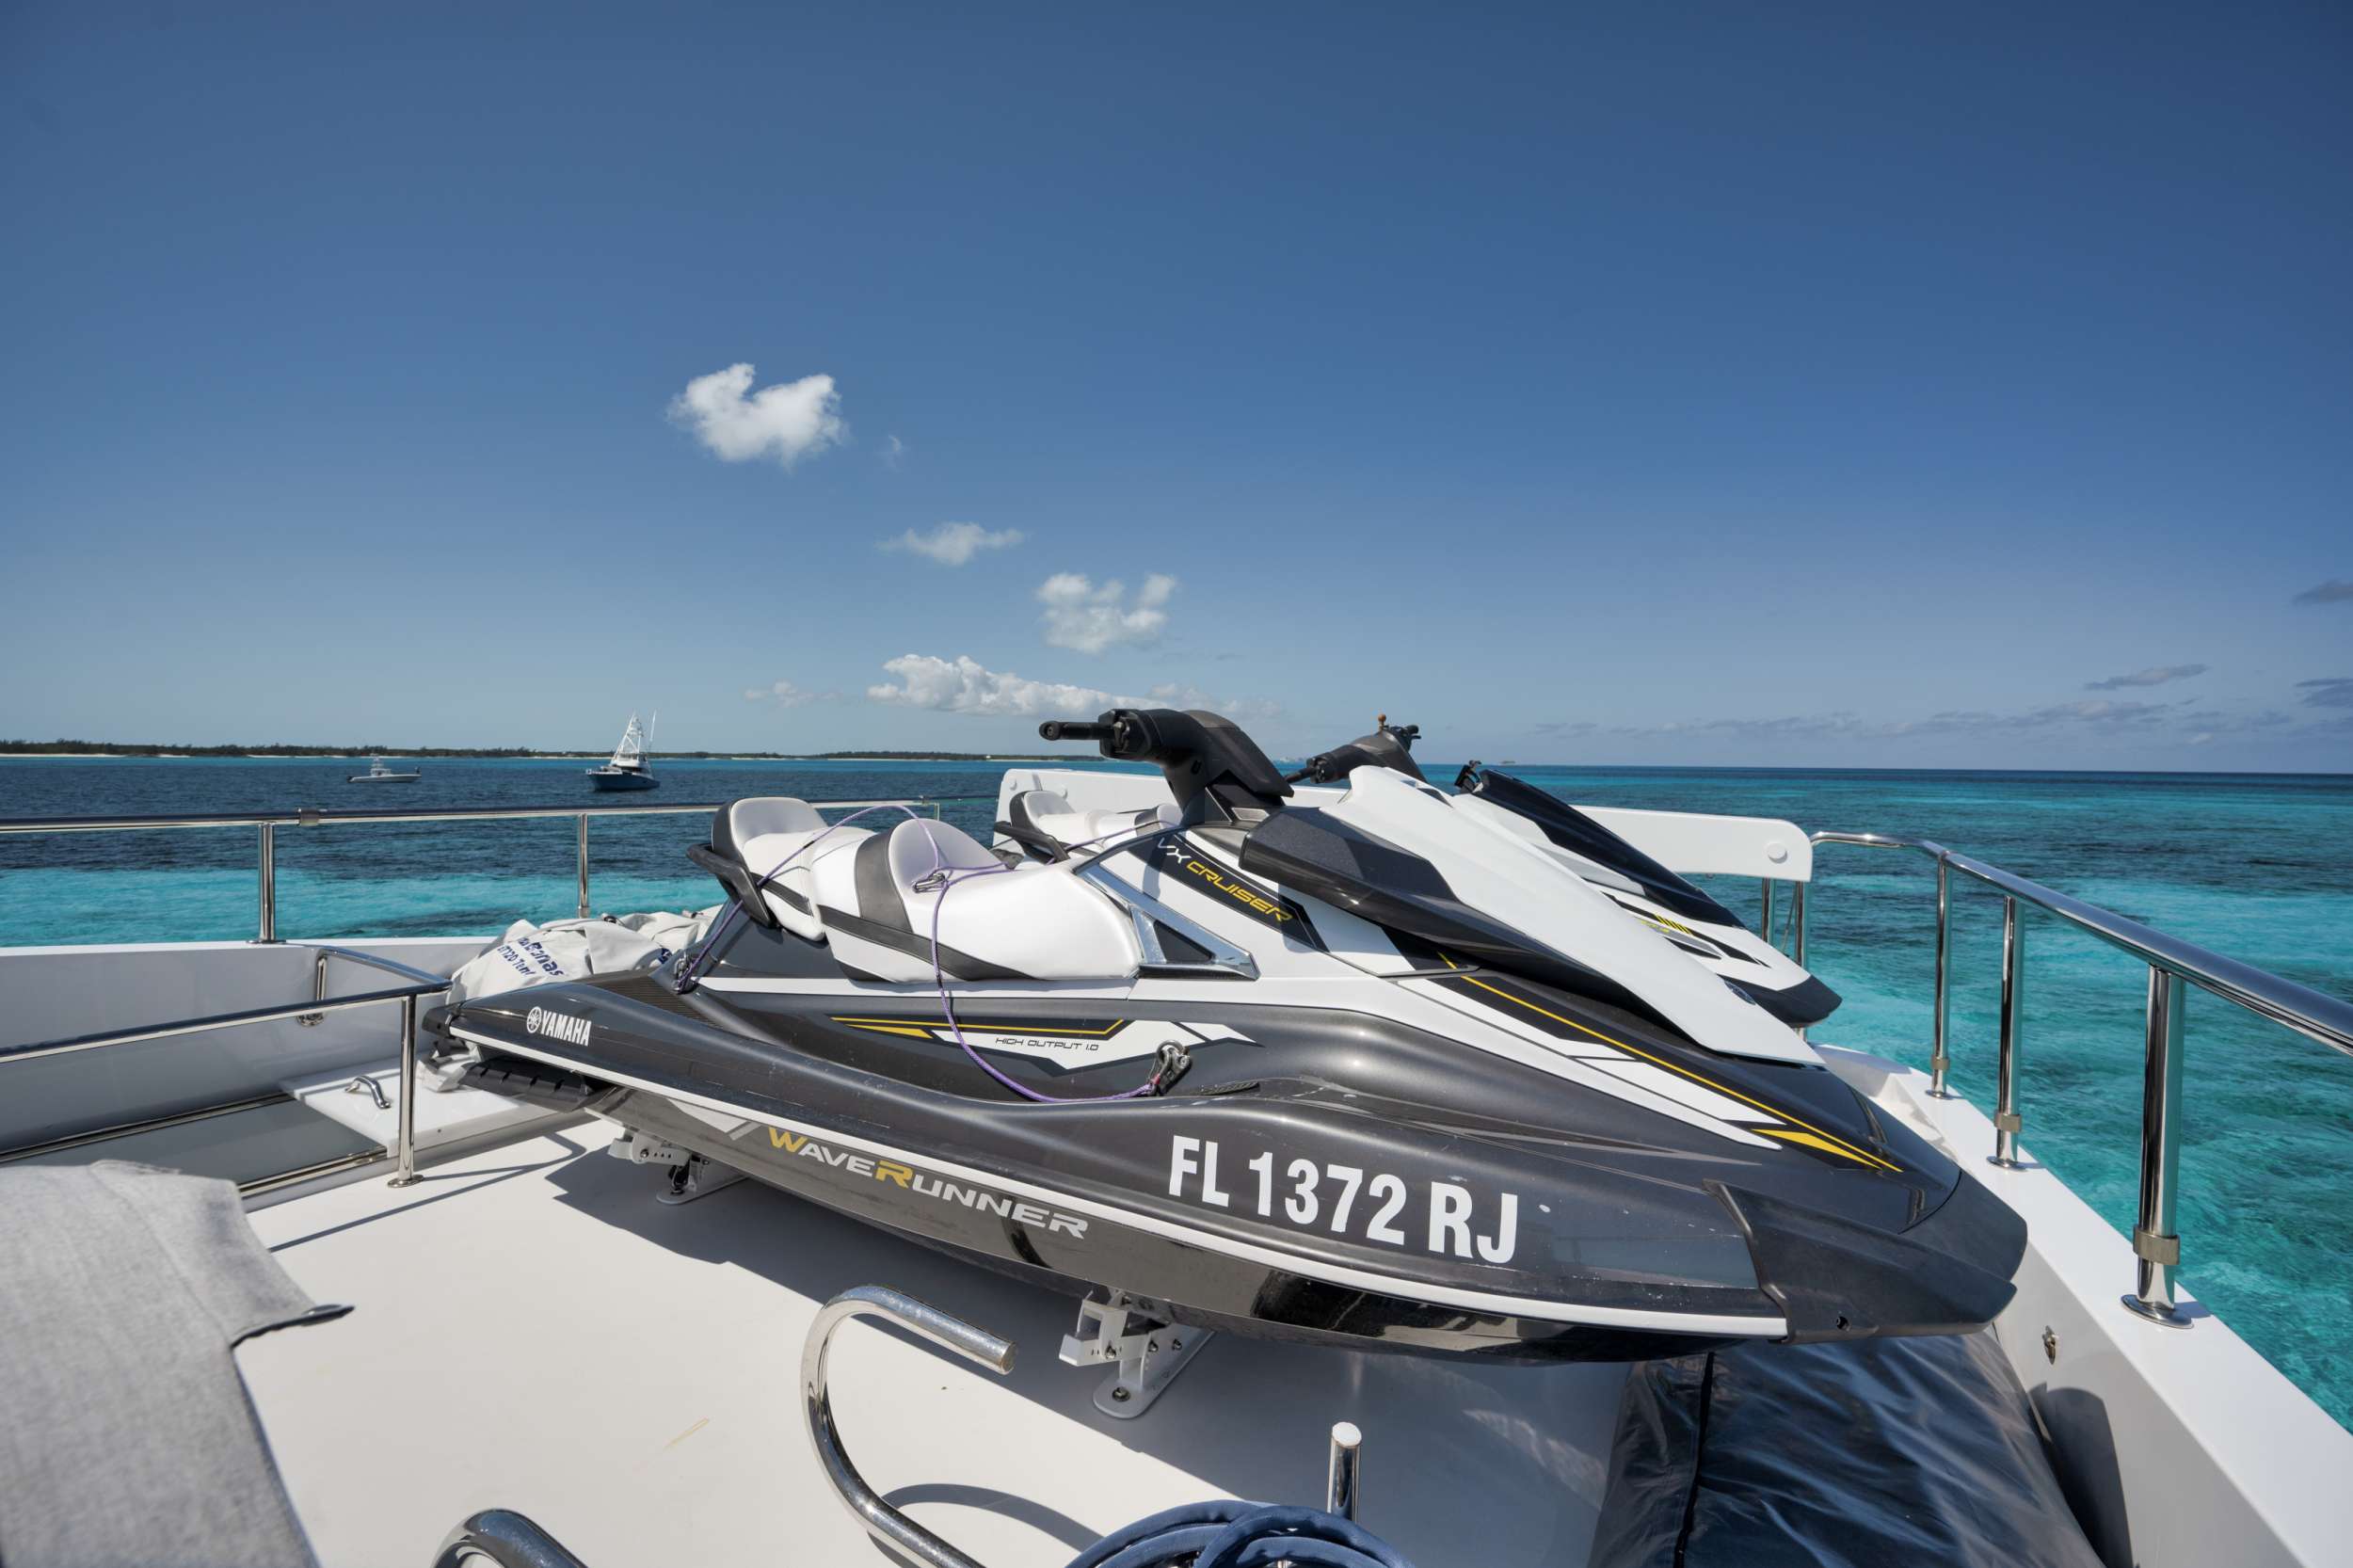 LIMITLESS Yacht Charter - Two Jet Skis